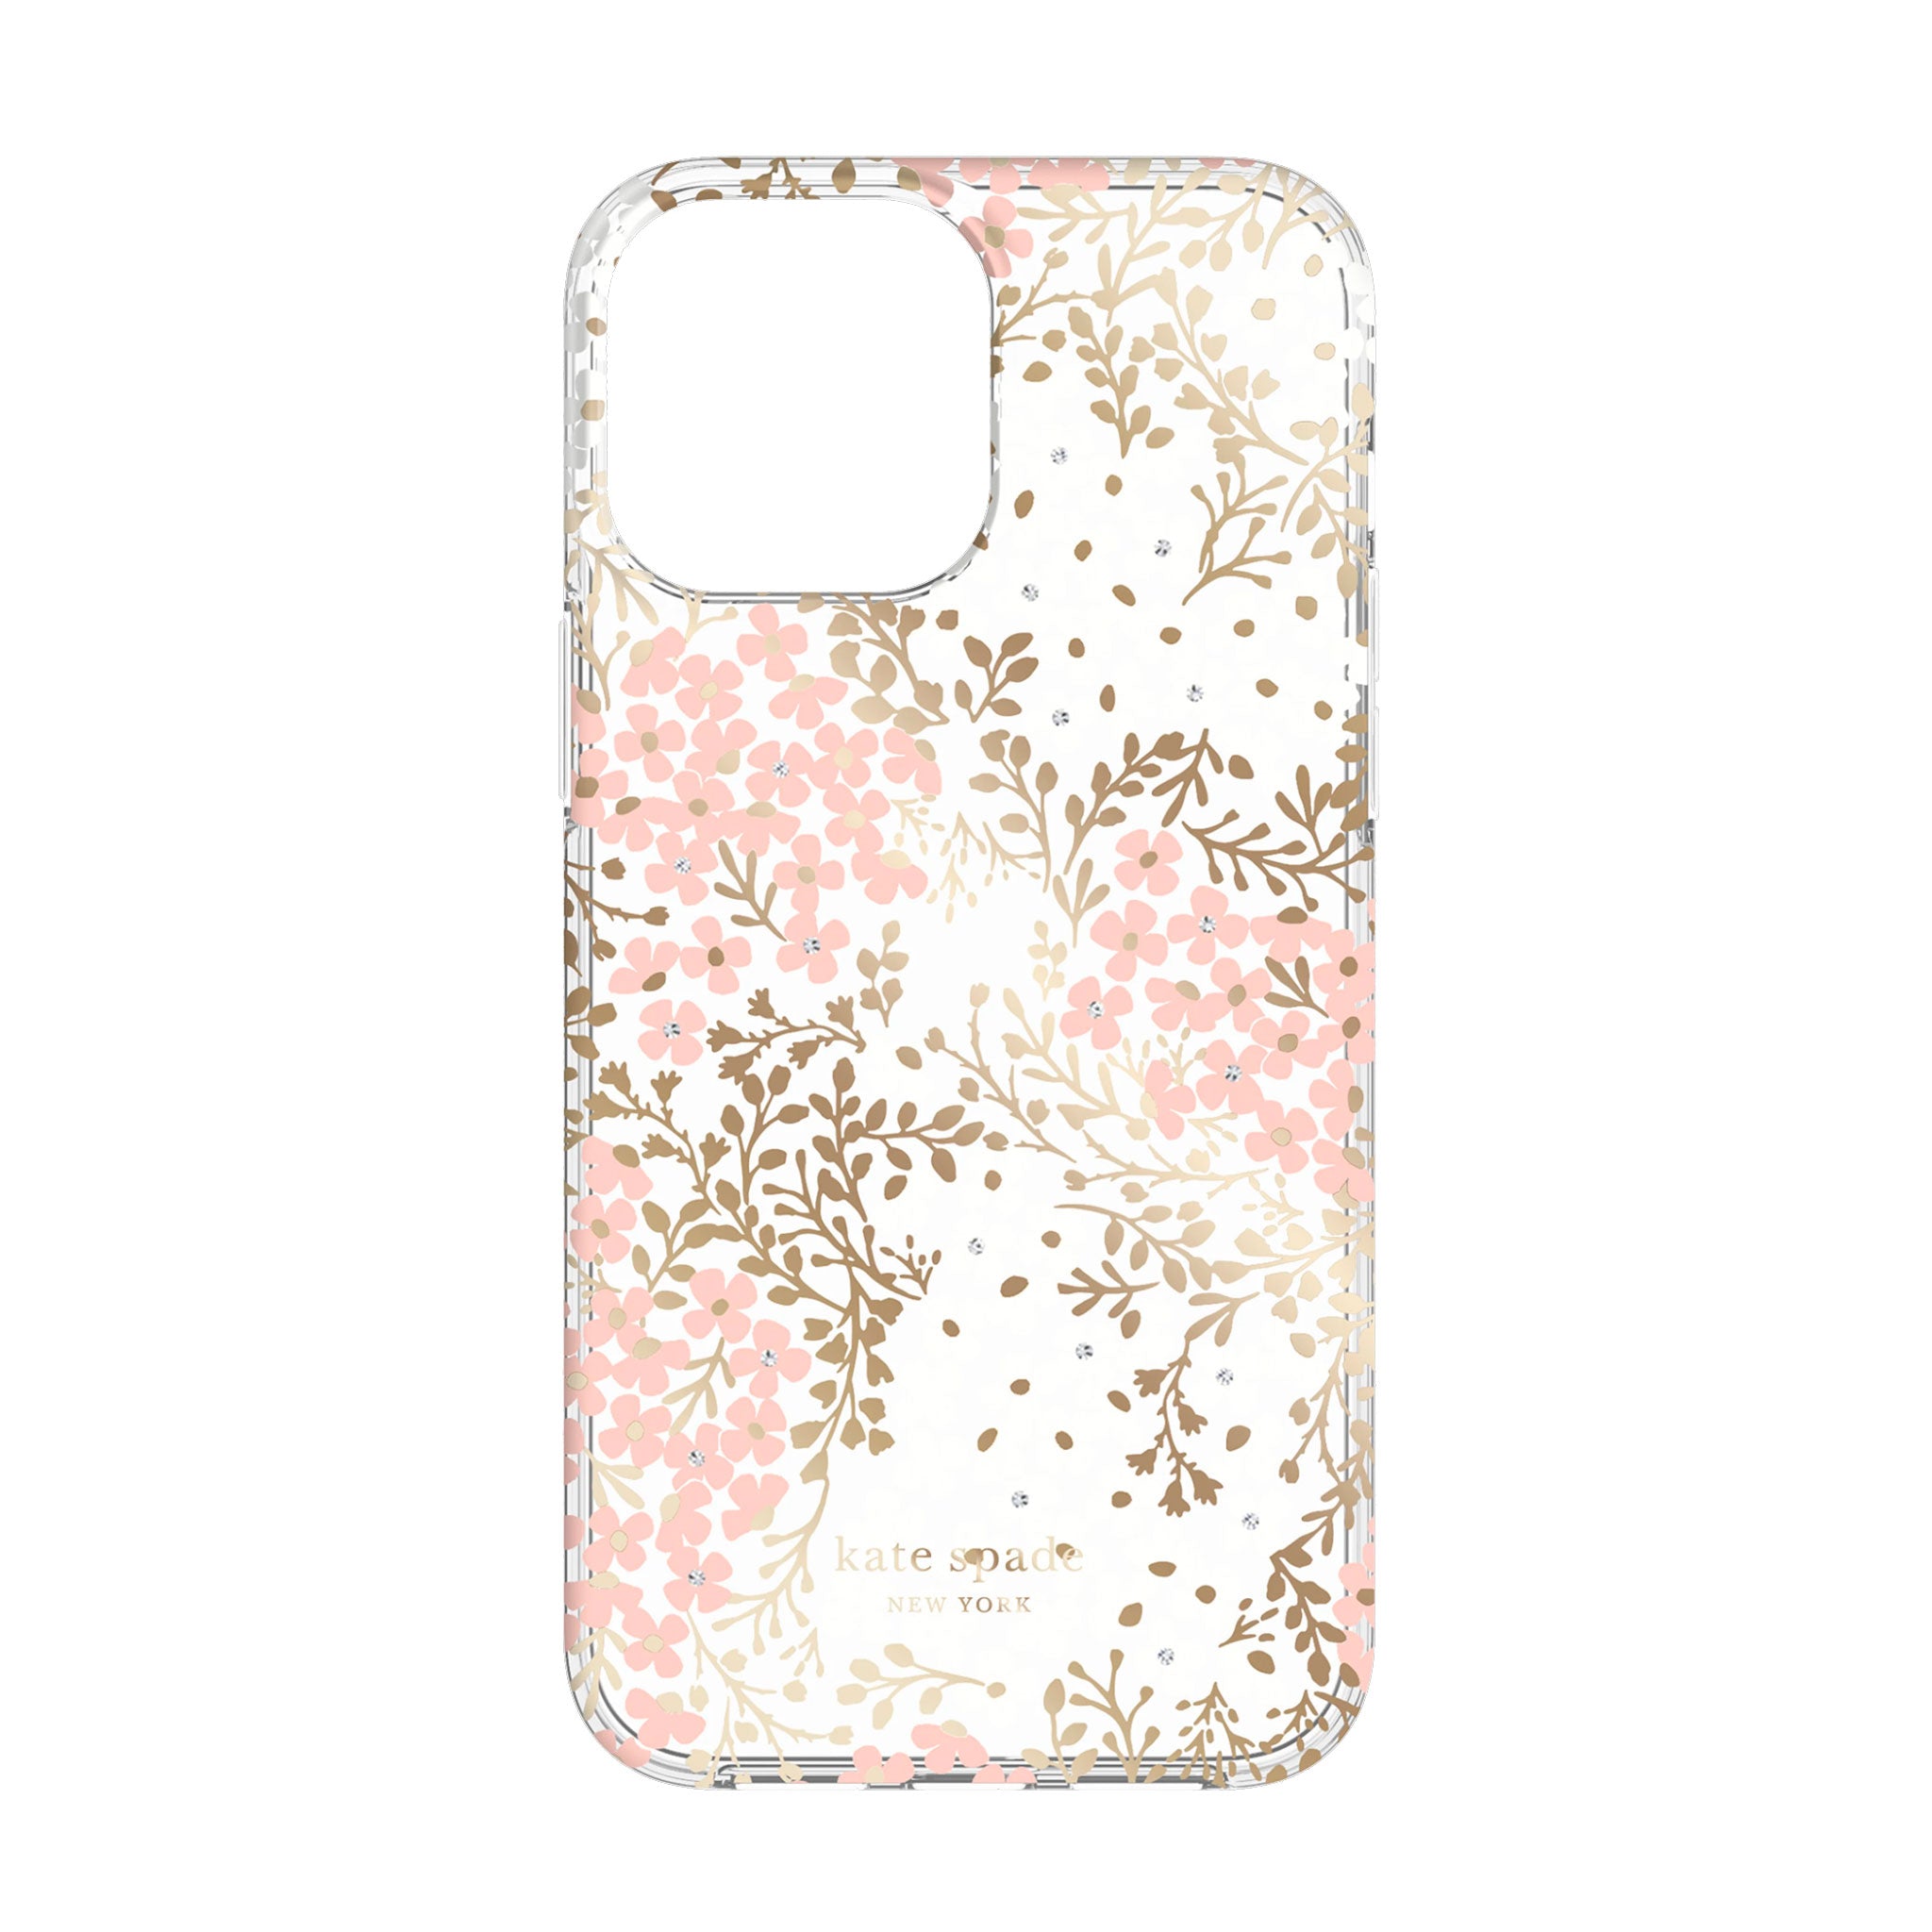 Kate Spade - Hardshell Case For Apple iPhone 13 Pro Max - Multi Floral Pink And Gold